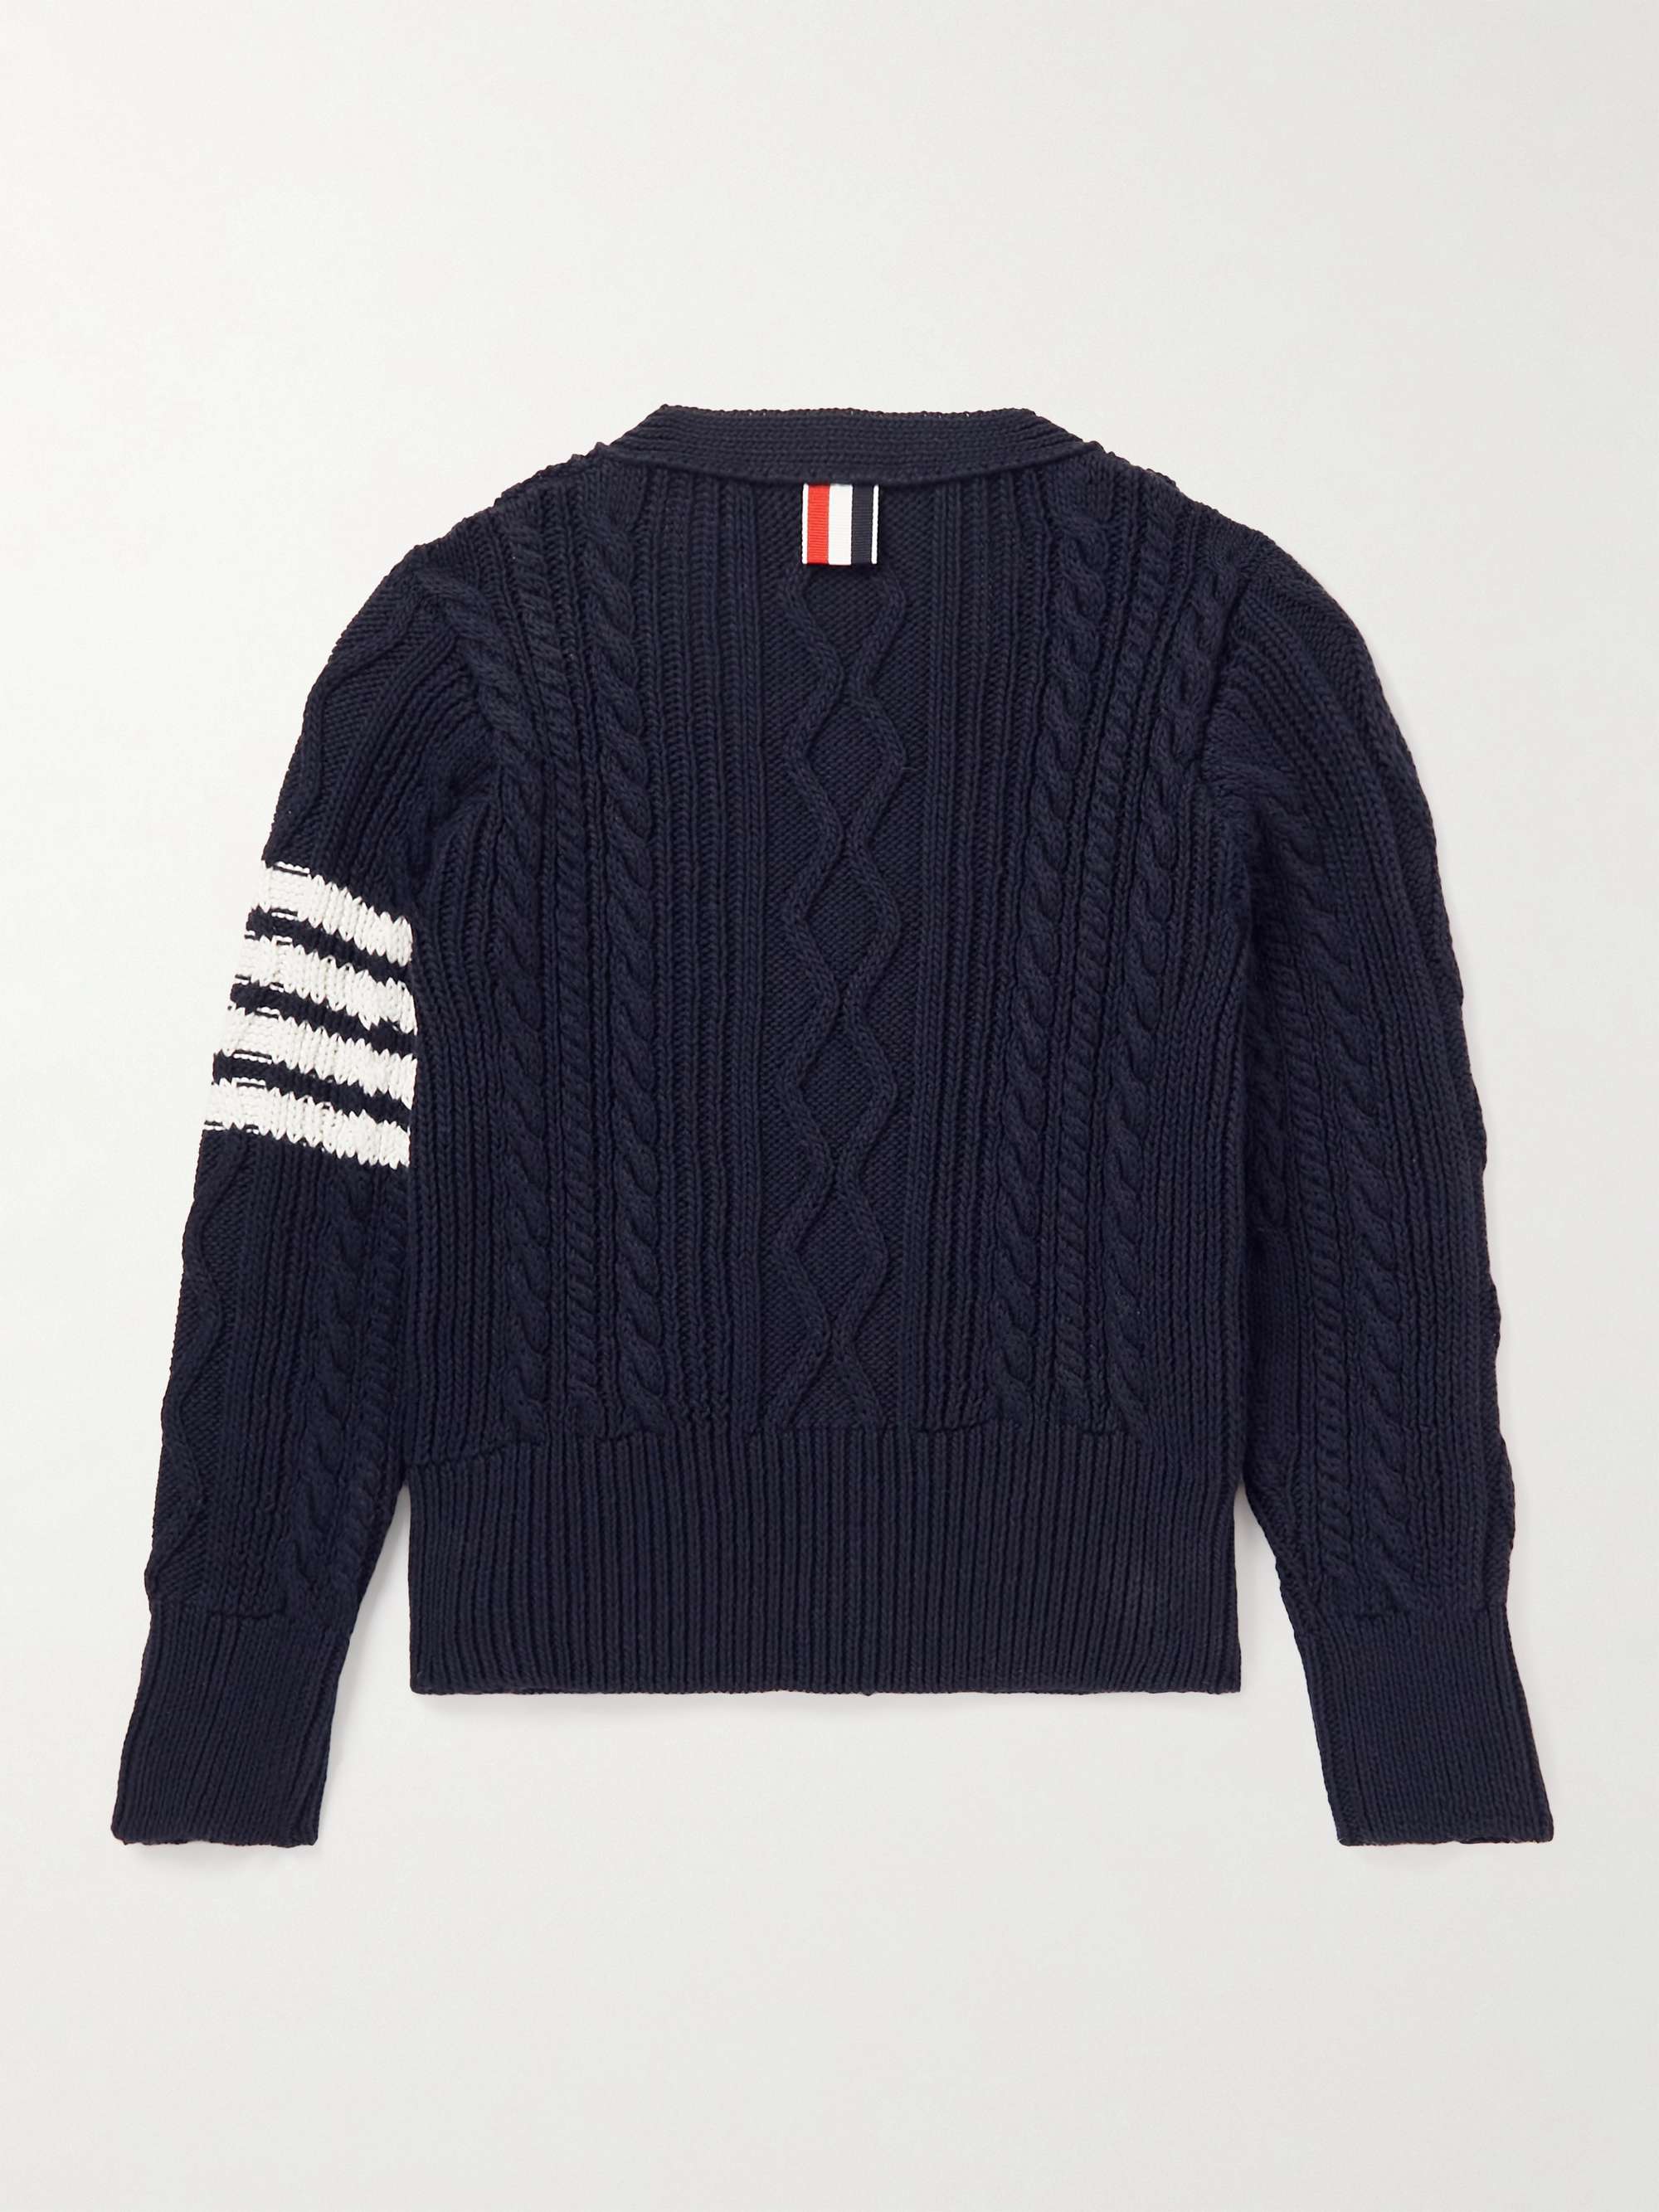 THOM BROWNE KIDS Striped Cable-Knit Cotton Cardigan | MR PORTER